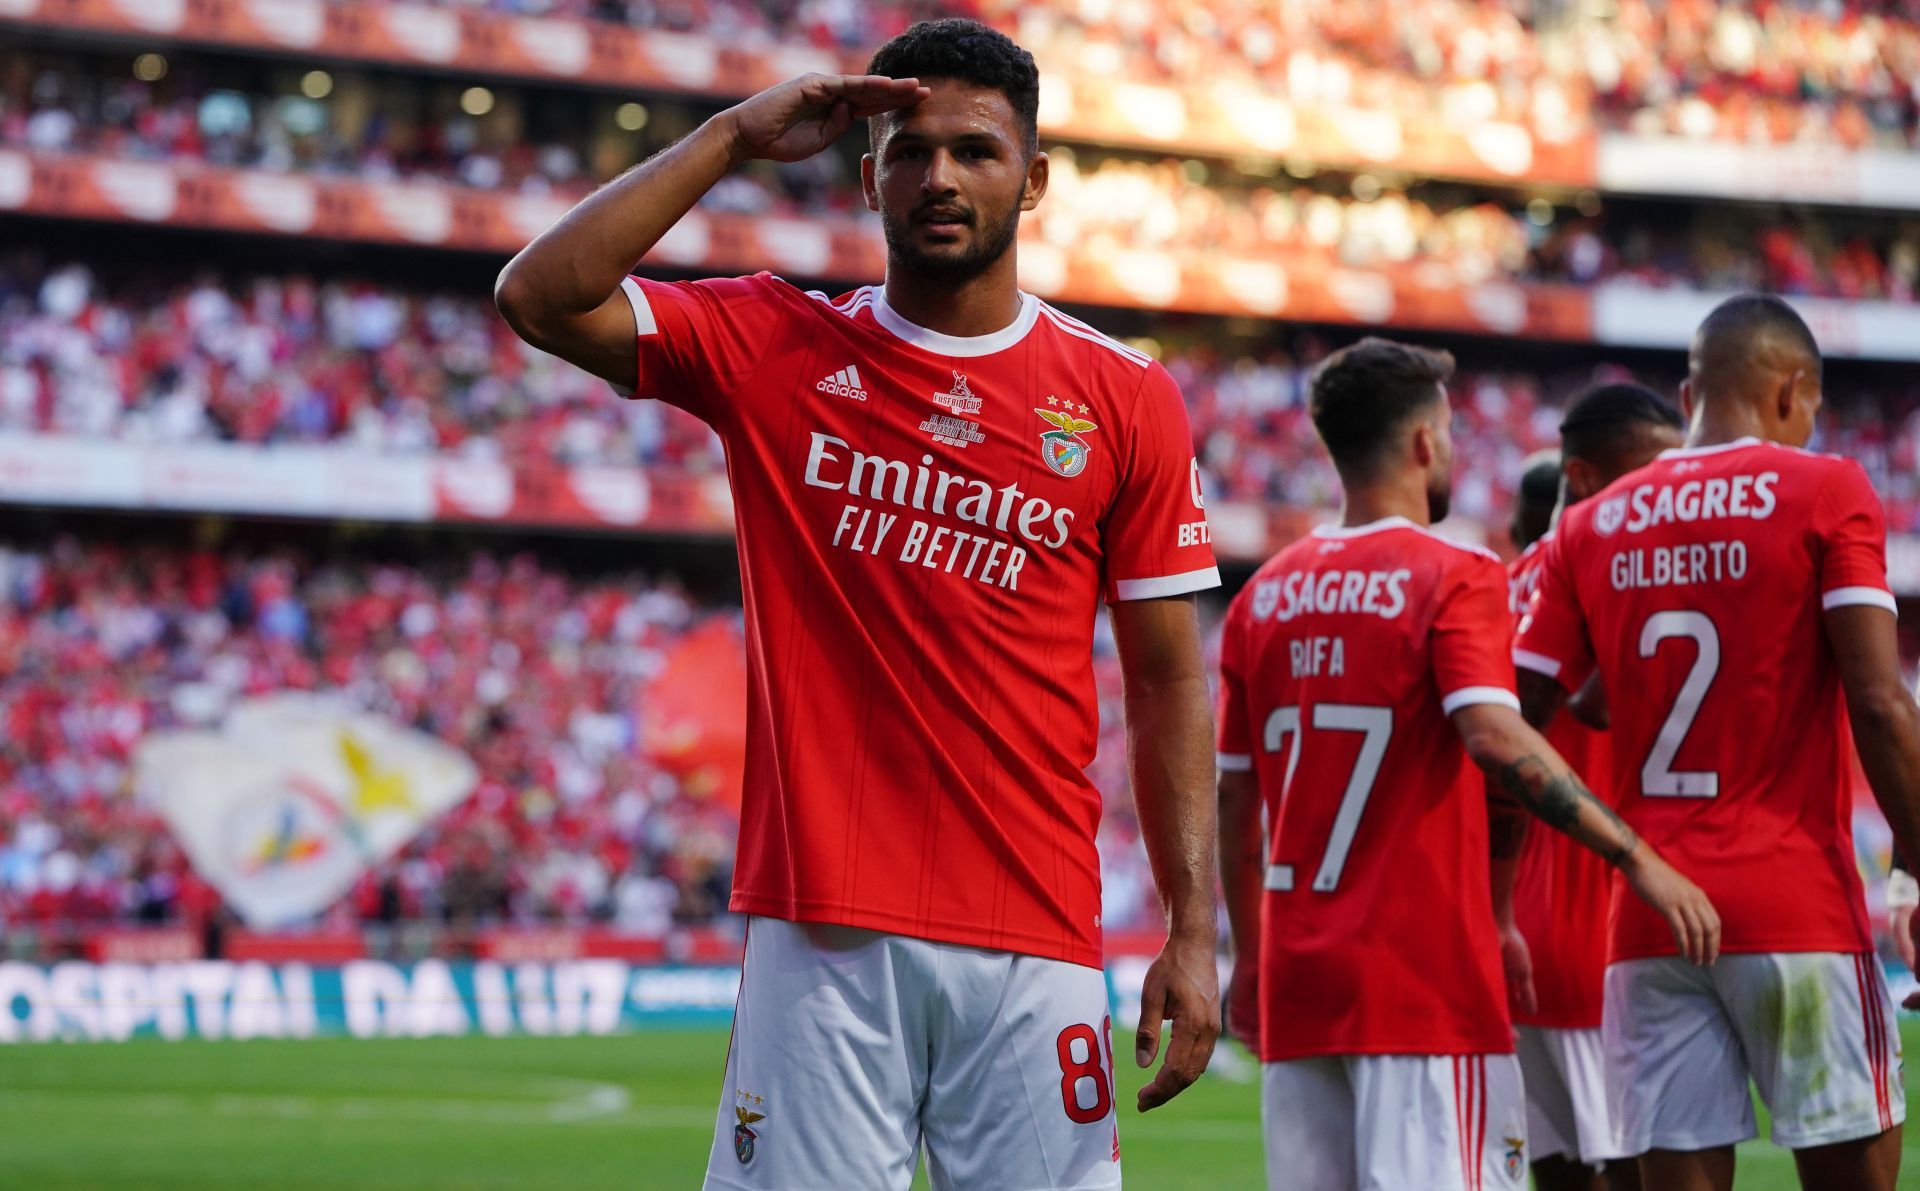 Benfica begin their Champions League qualifying campaign against Midtjylland on Tuesday